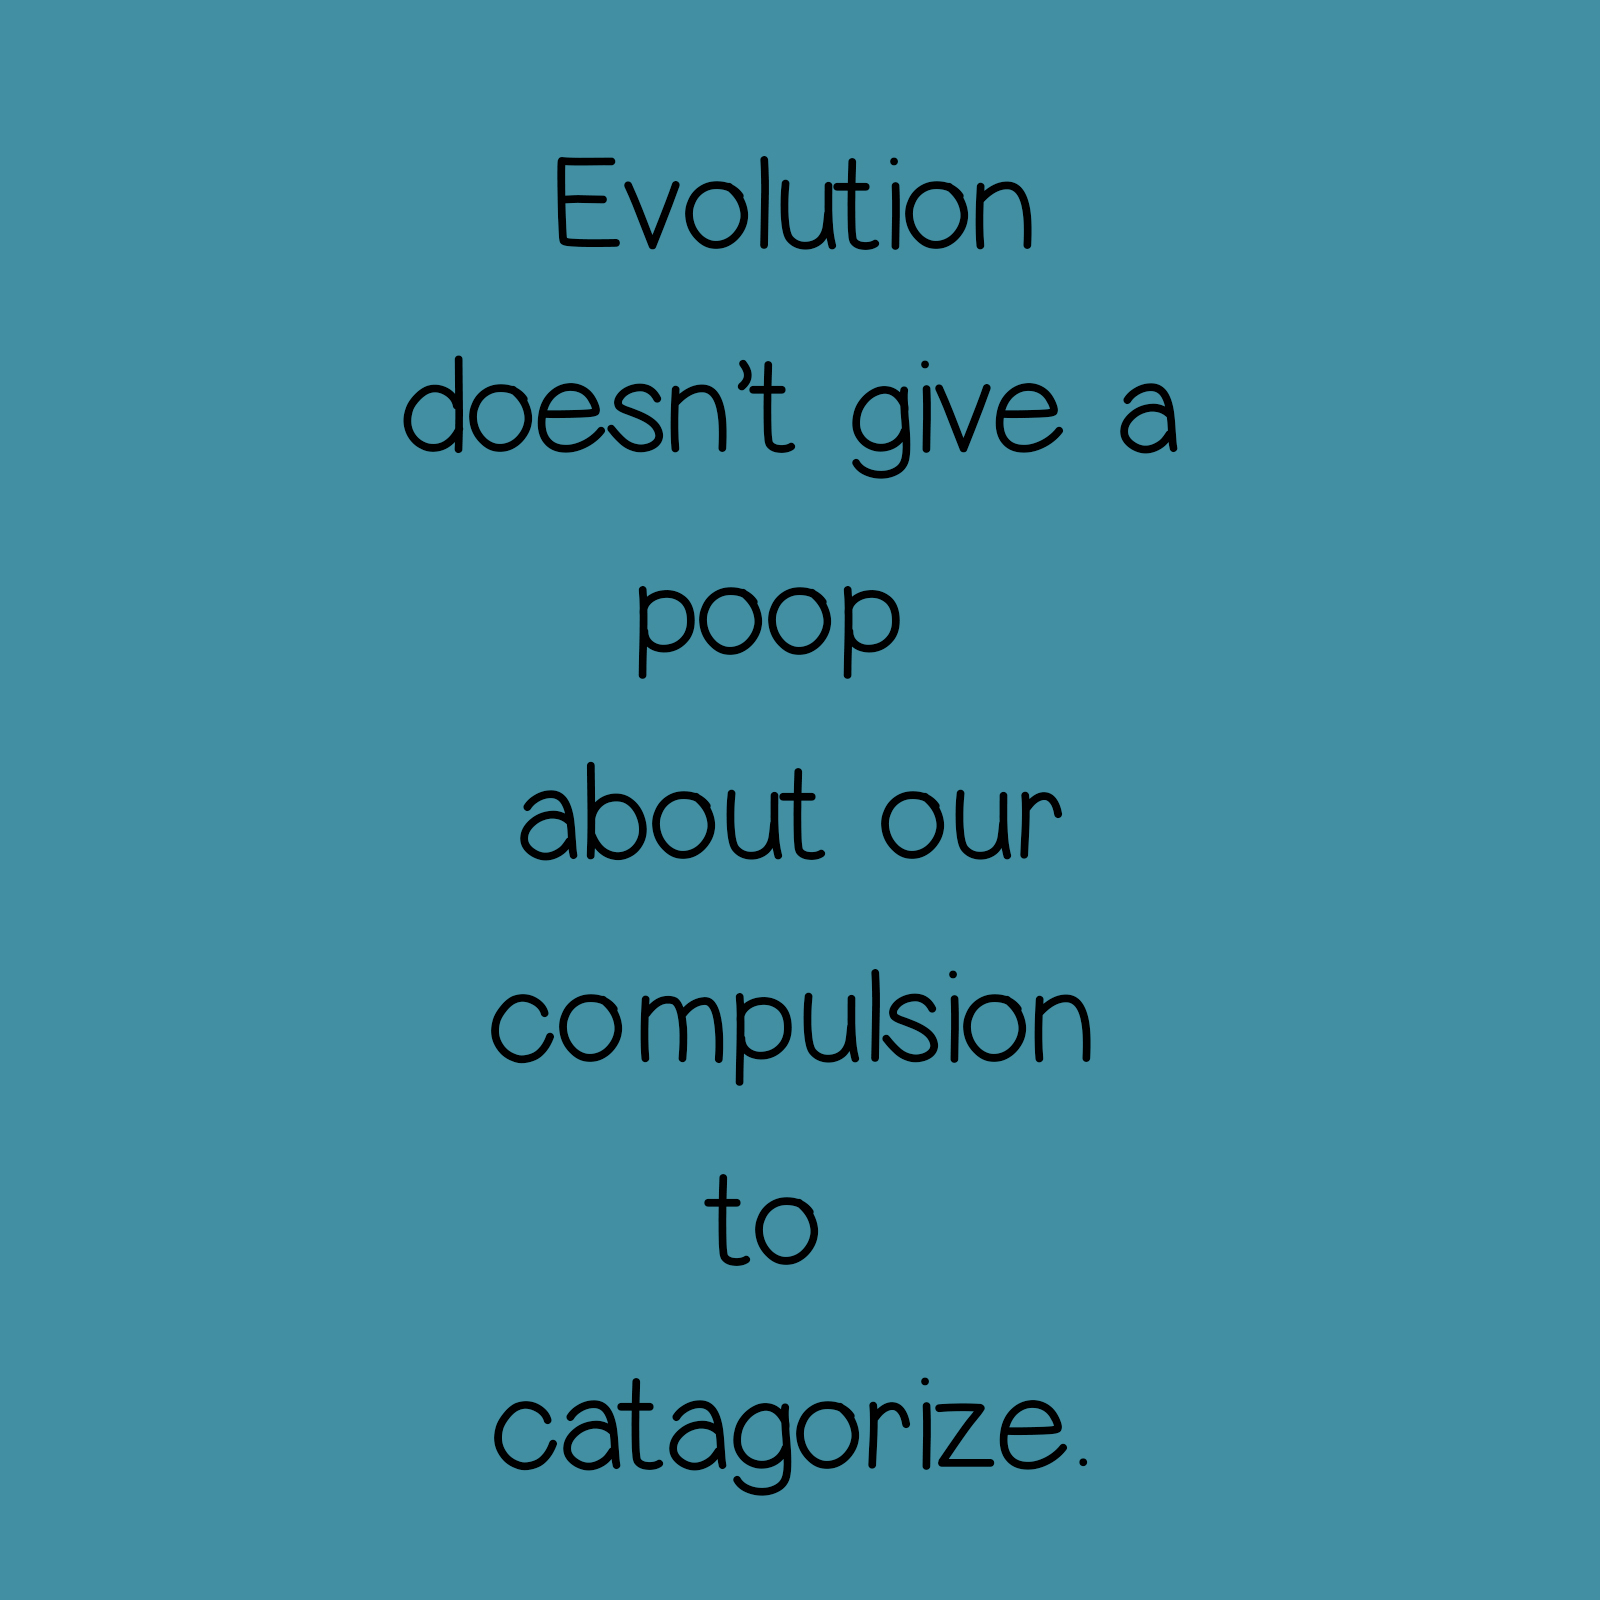 Evolution doesn't give a poop about our compulsion to categorize.